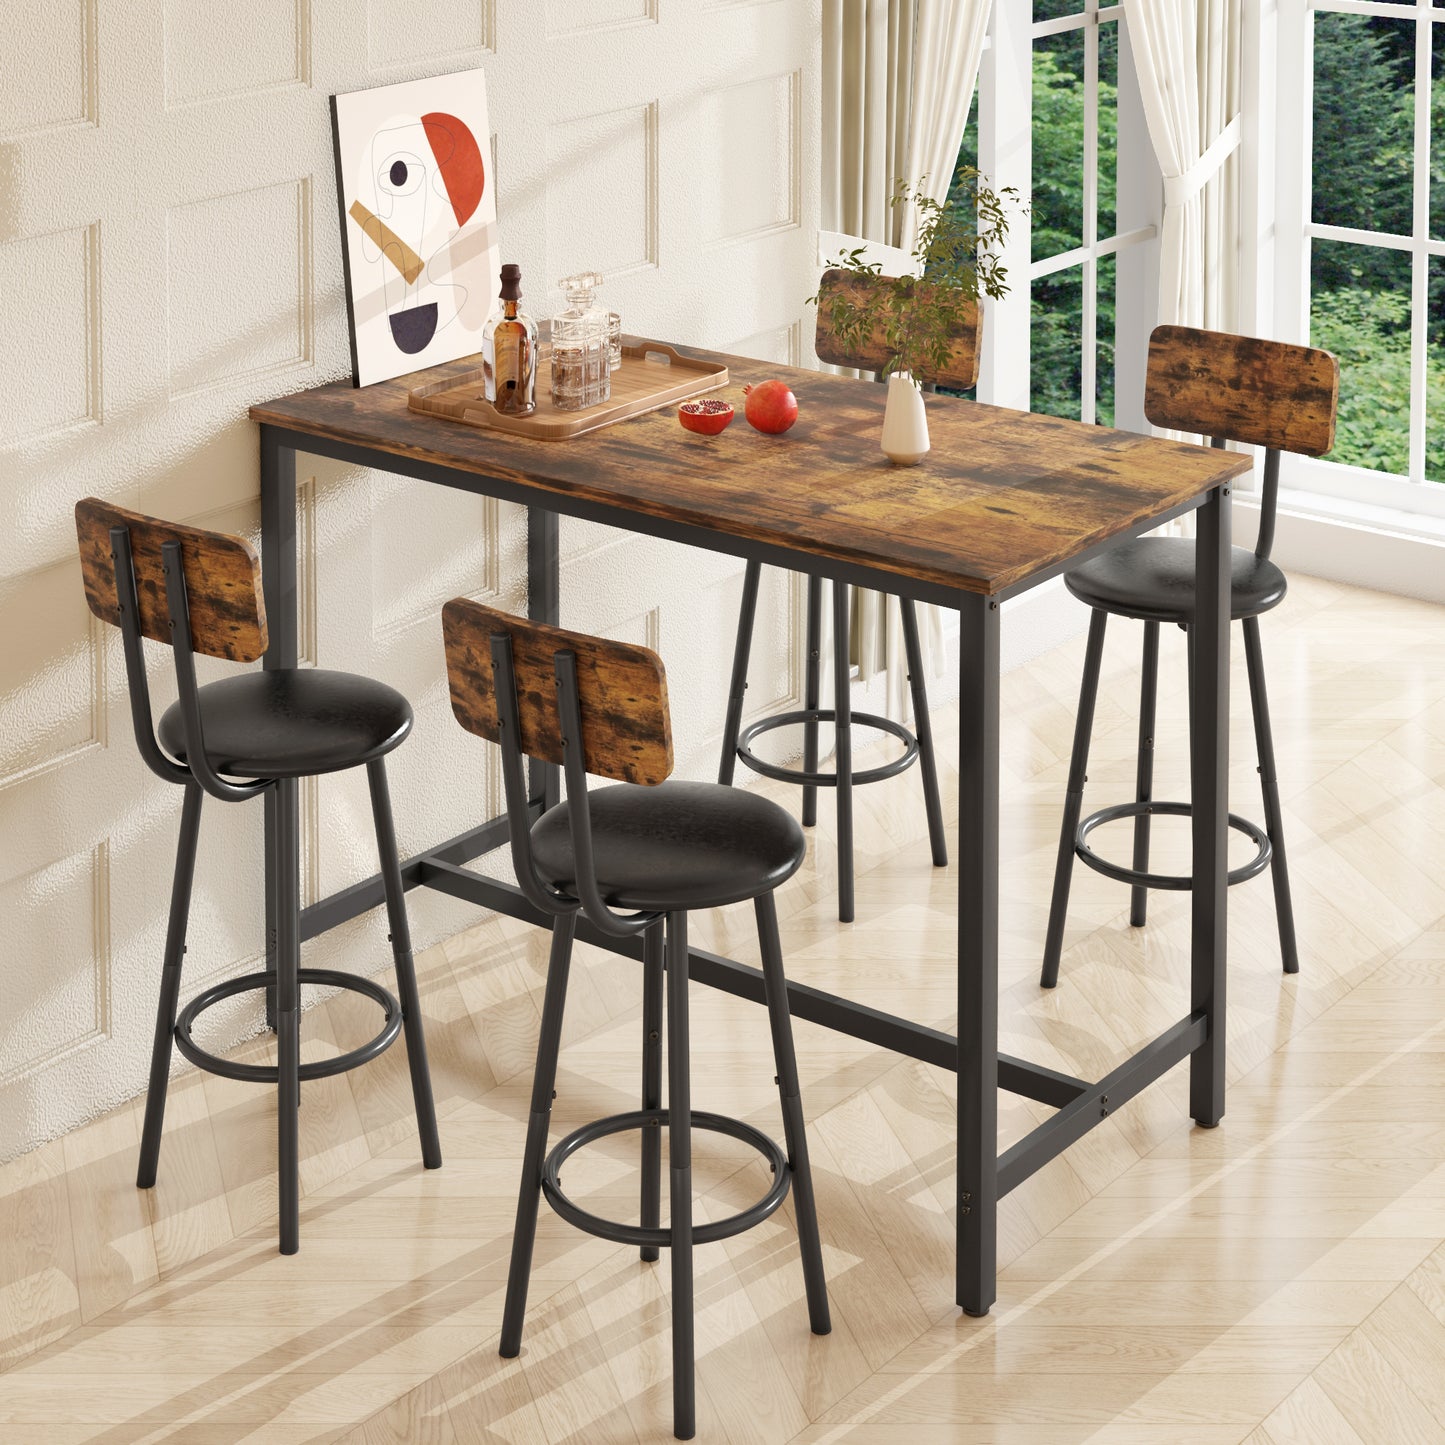 Modern Counter Height Pub Set, SYNGAR 5 Piece Dining Table Set with 4 Cushioned Stools, Extra Long Bistro Bar Table with Footrest, Kitchen Breakfast Table Set for 4, Rustic Brown